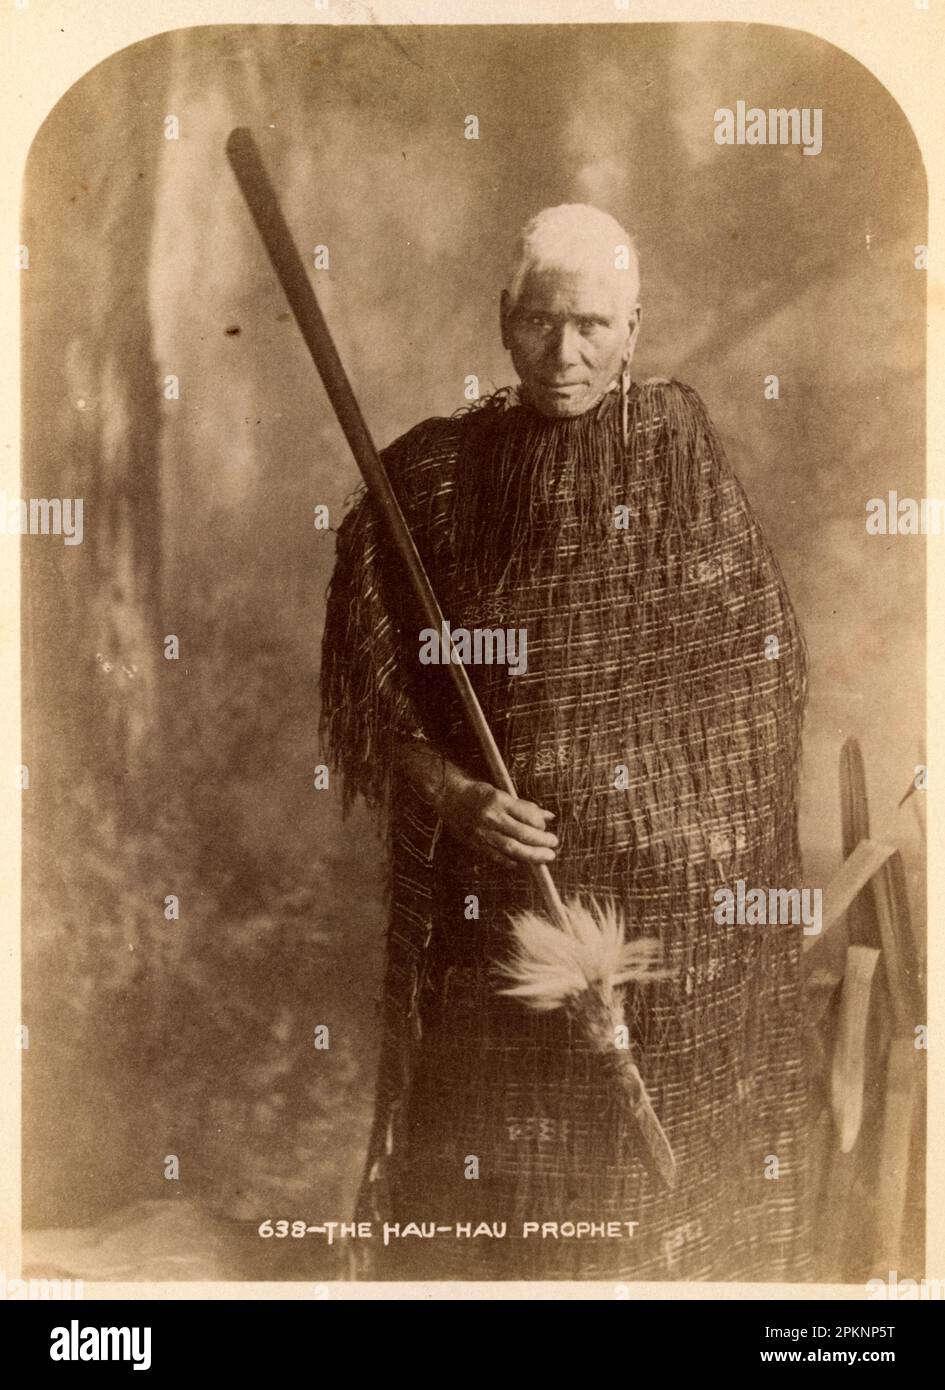 Portrait of The Hau-Hau prophet, undated. The Hauhaus were a feature of the Maori Land Wars in New Zealand in the 1860s. Stock Photo